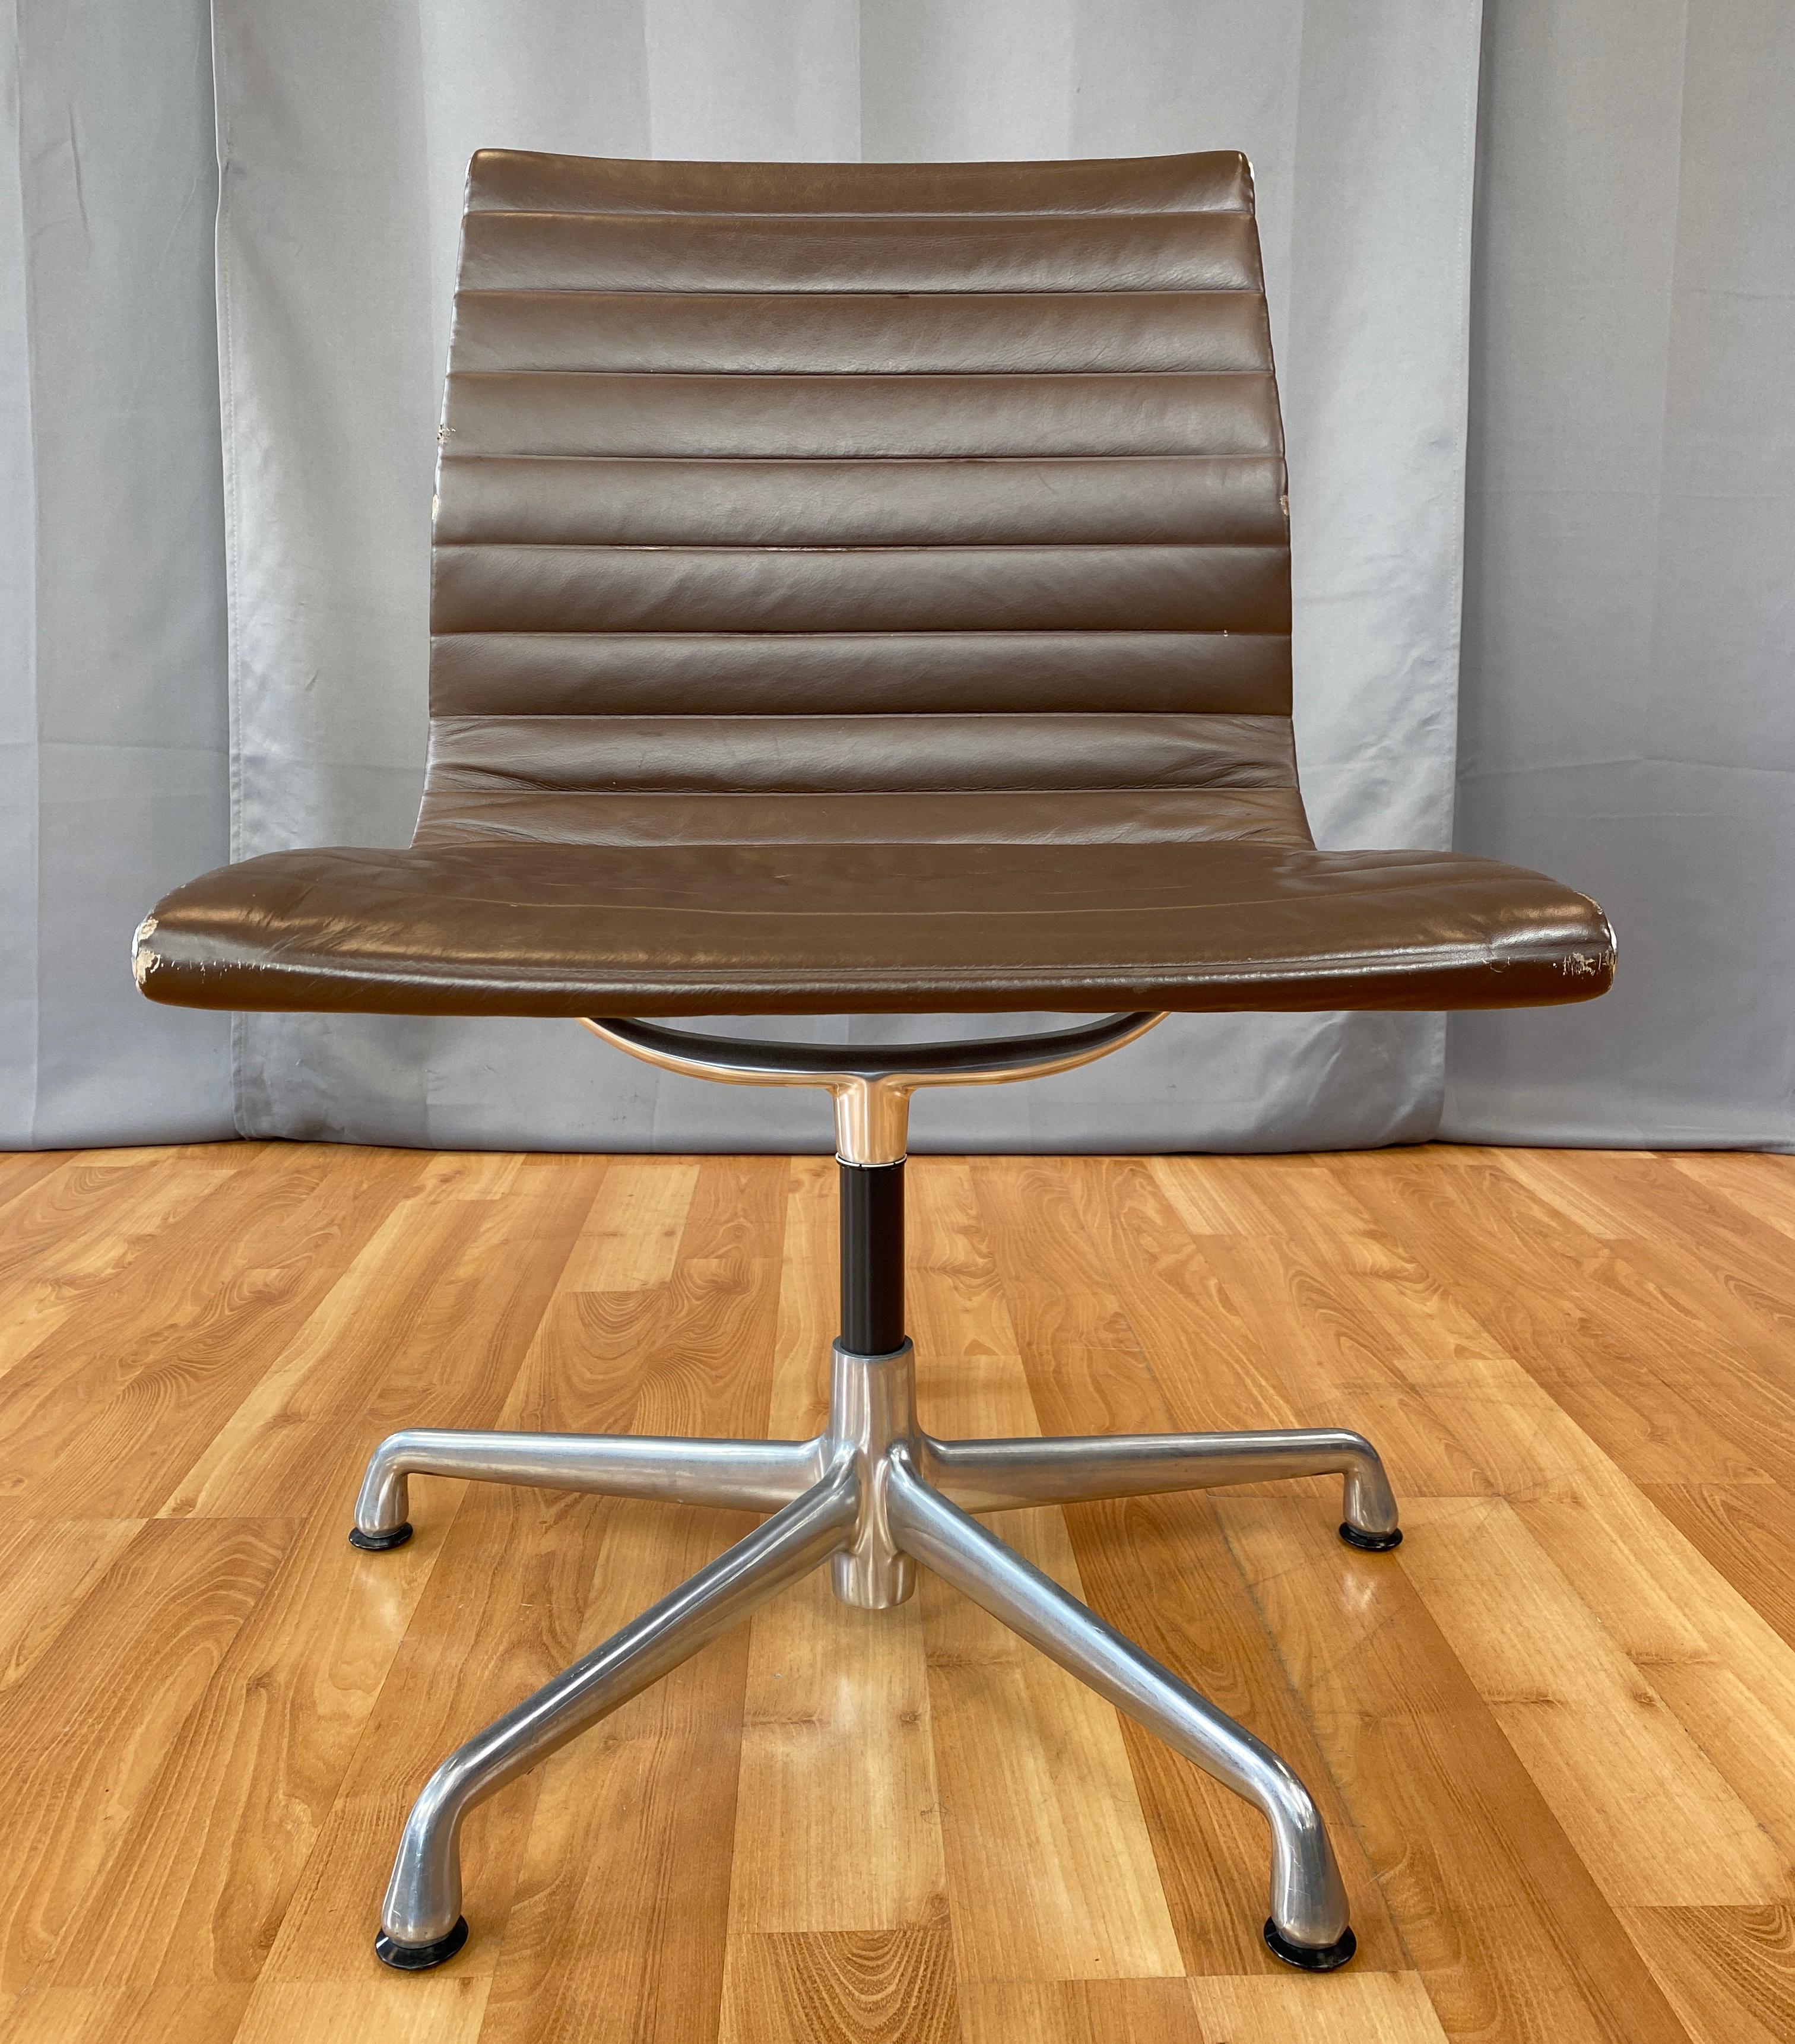 Offered here is a Eames aluminum group armless side chair. 
Has an aluminum frame and brown leather upholstery. 
First designed in 1958, this one is circa 2000's.